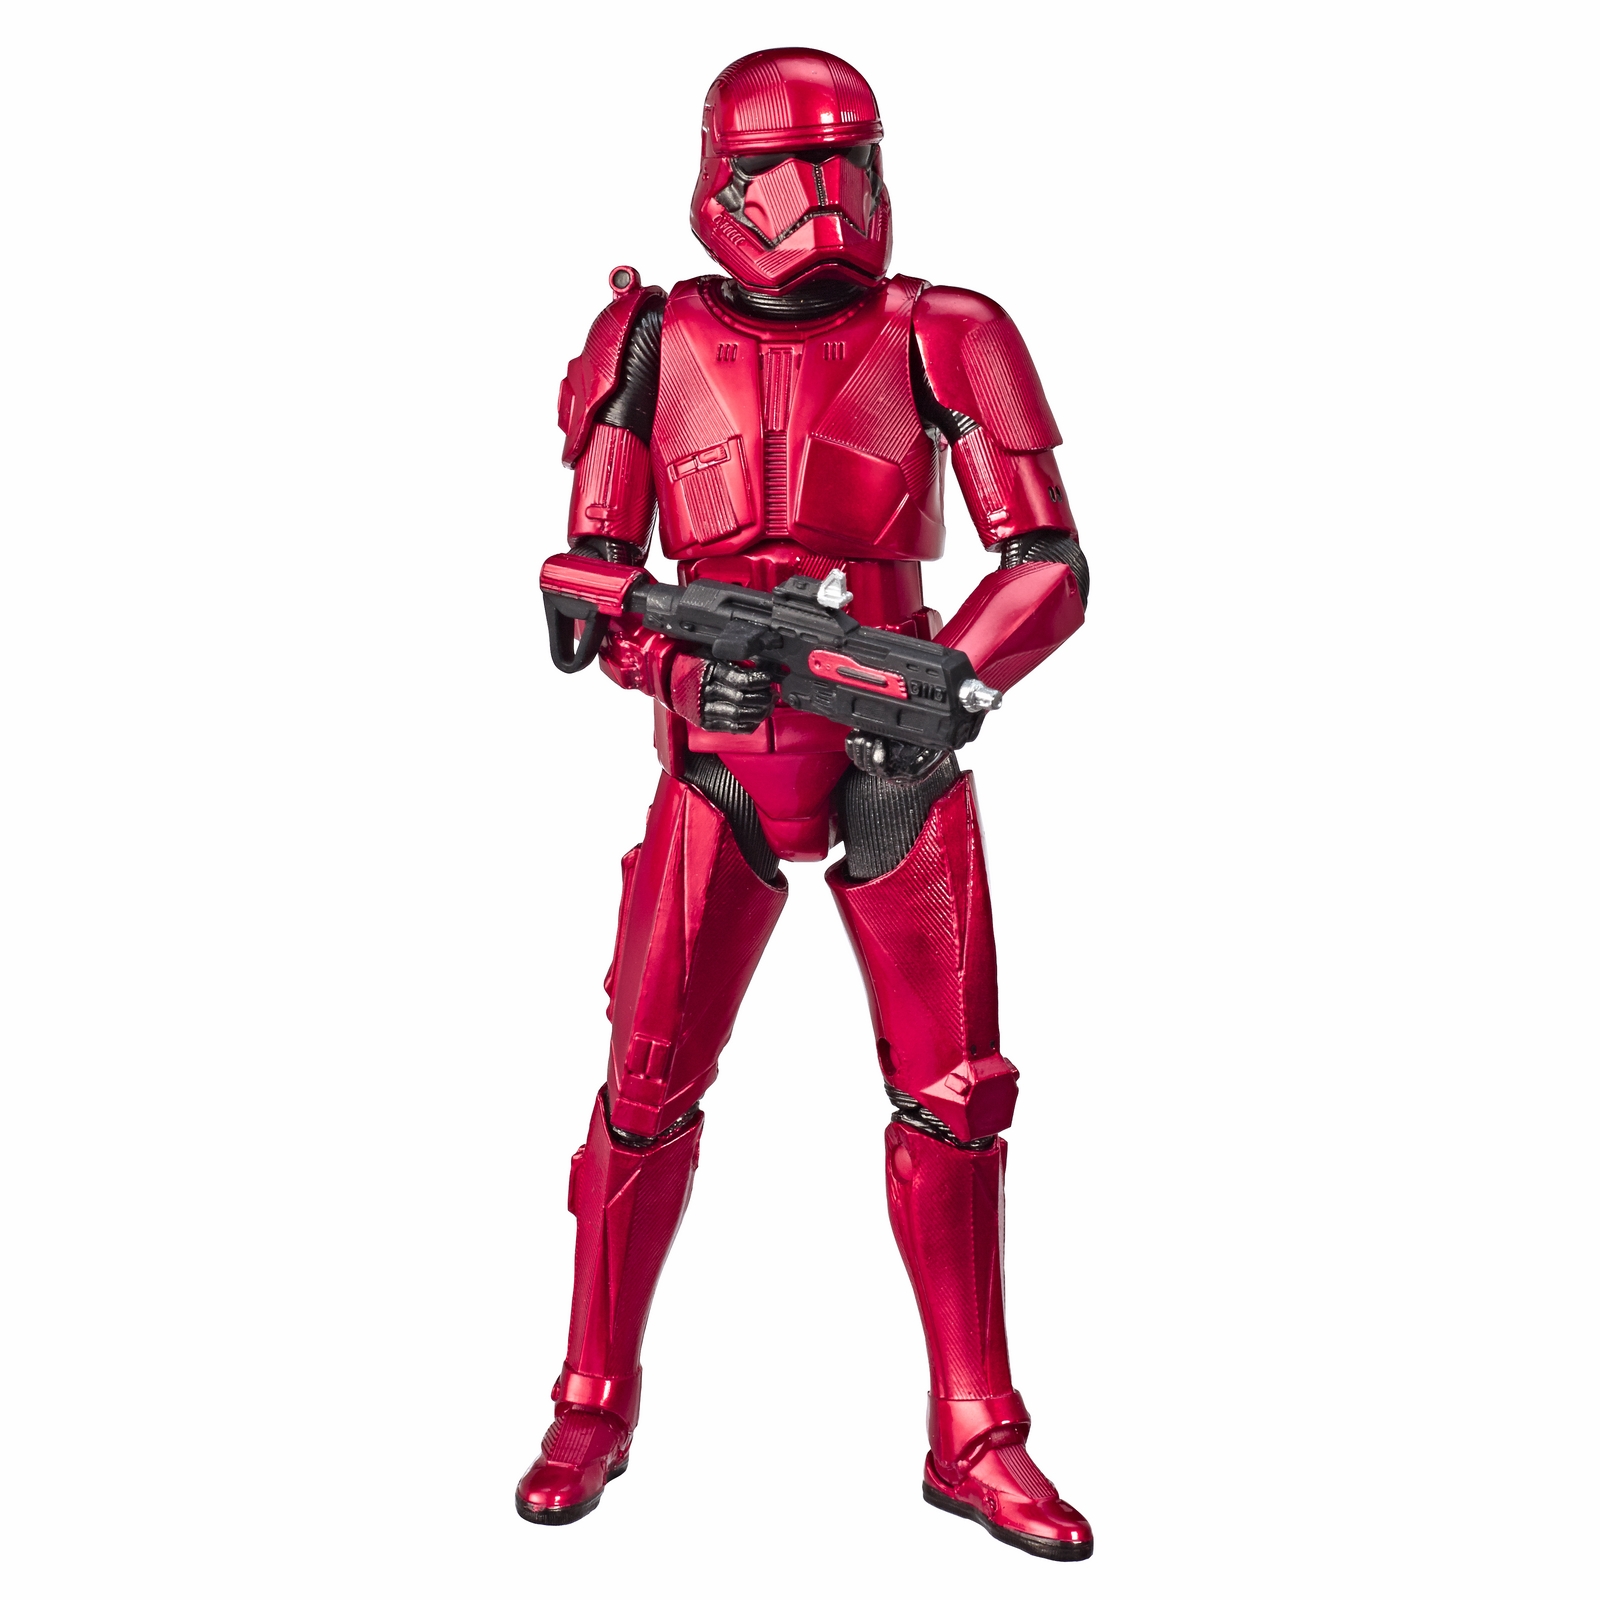 STAR%20WARS%20THE%20BLACK%20SERIES%206-INCH%20SITH%20TROOPER%20CARBONIZED%20COLLECTION%20Figure%20-%20oop.jpg